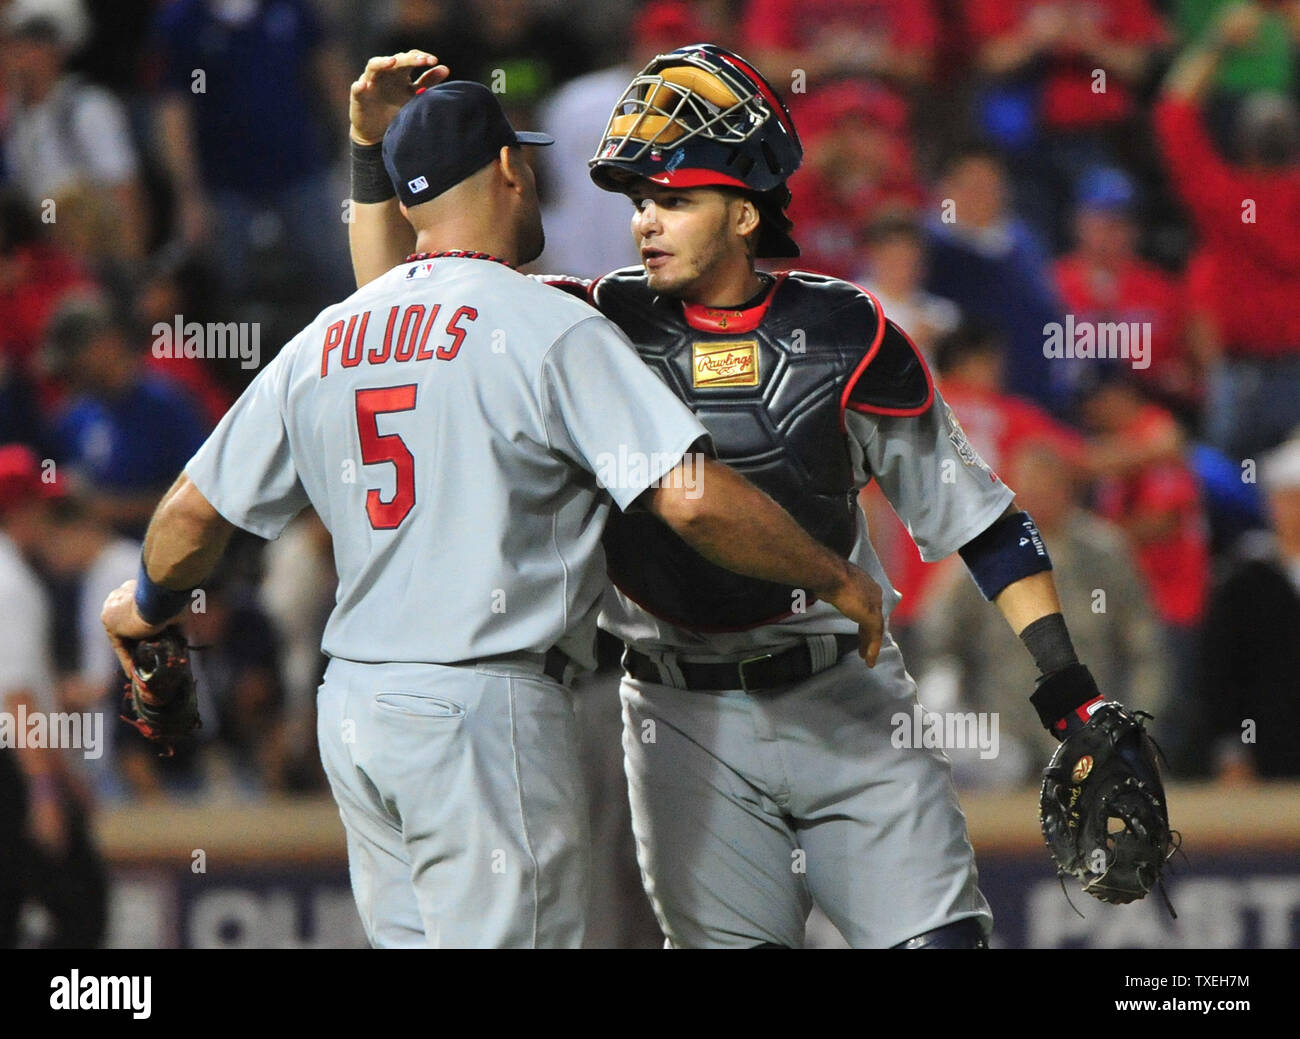 St. Louis Cardinals: Doors are opening for Yadier Molina as manager